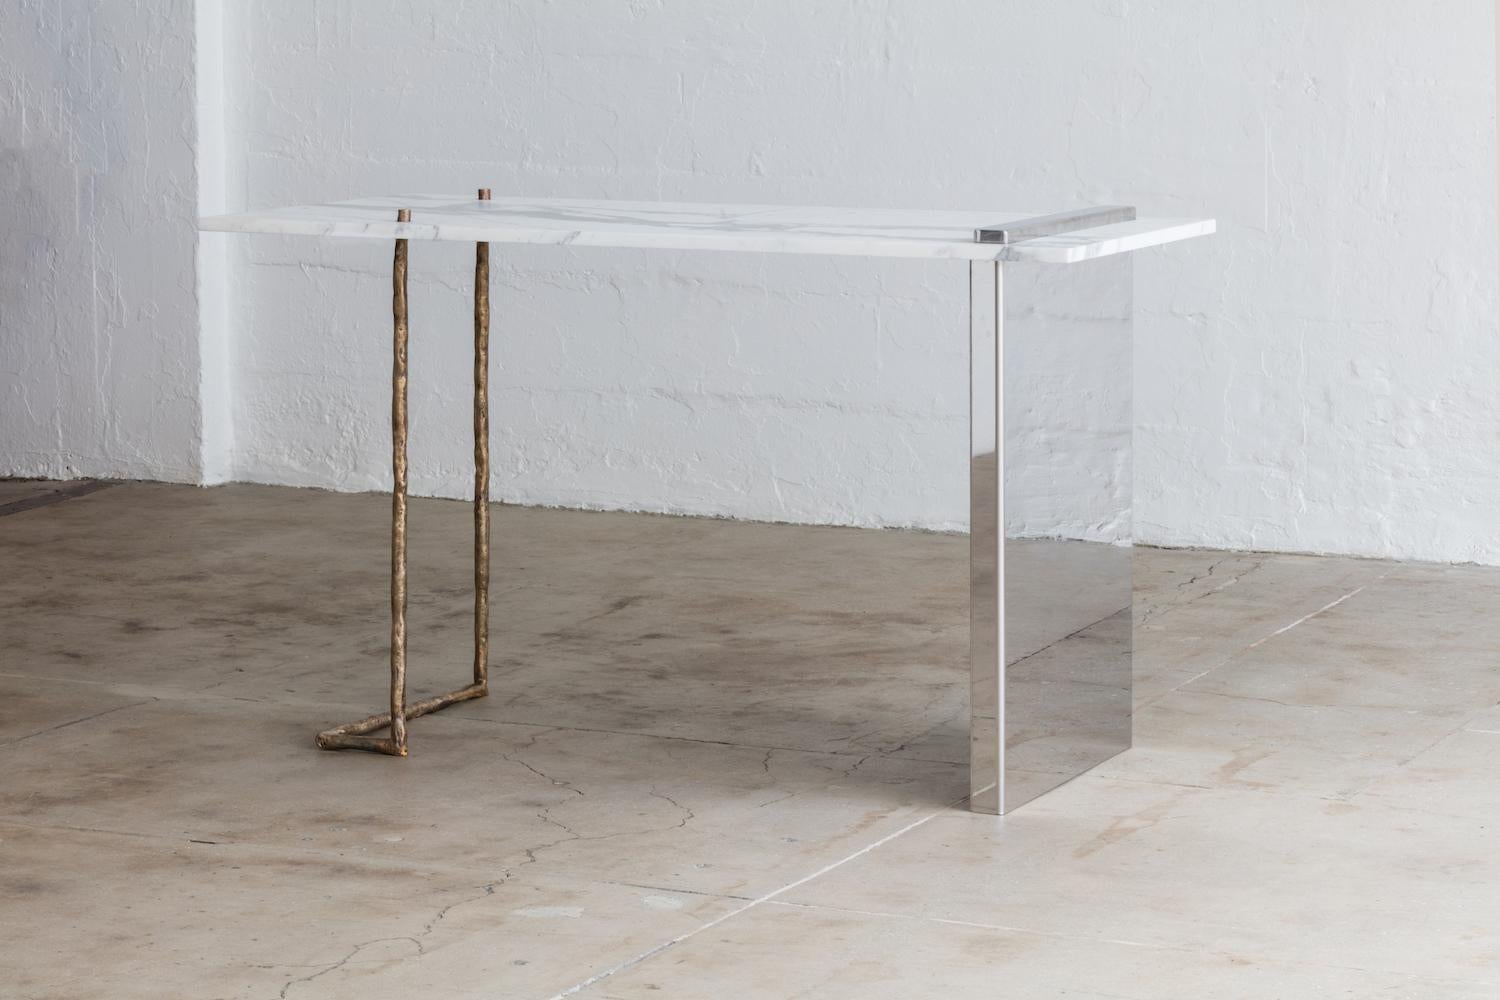 Measurements
24 W x 52 L x 30 H inches

Material Specifications
Top: Marble, wood, stone
Legs: Cast bronze, stainless steel

Notes
Finishes and dimensions may be customized. Please inquire for any custom orders.
Prices may vary depending on